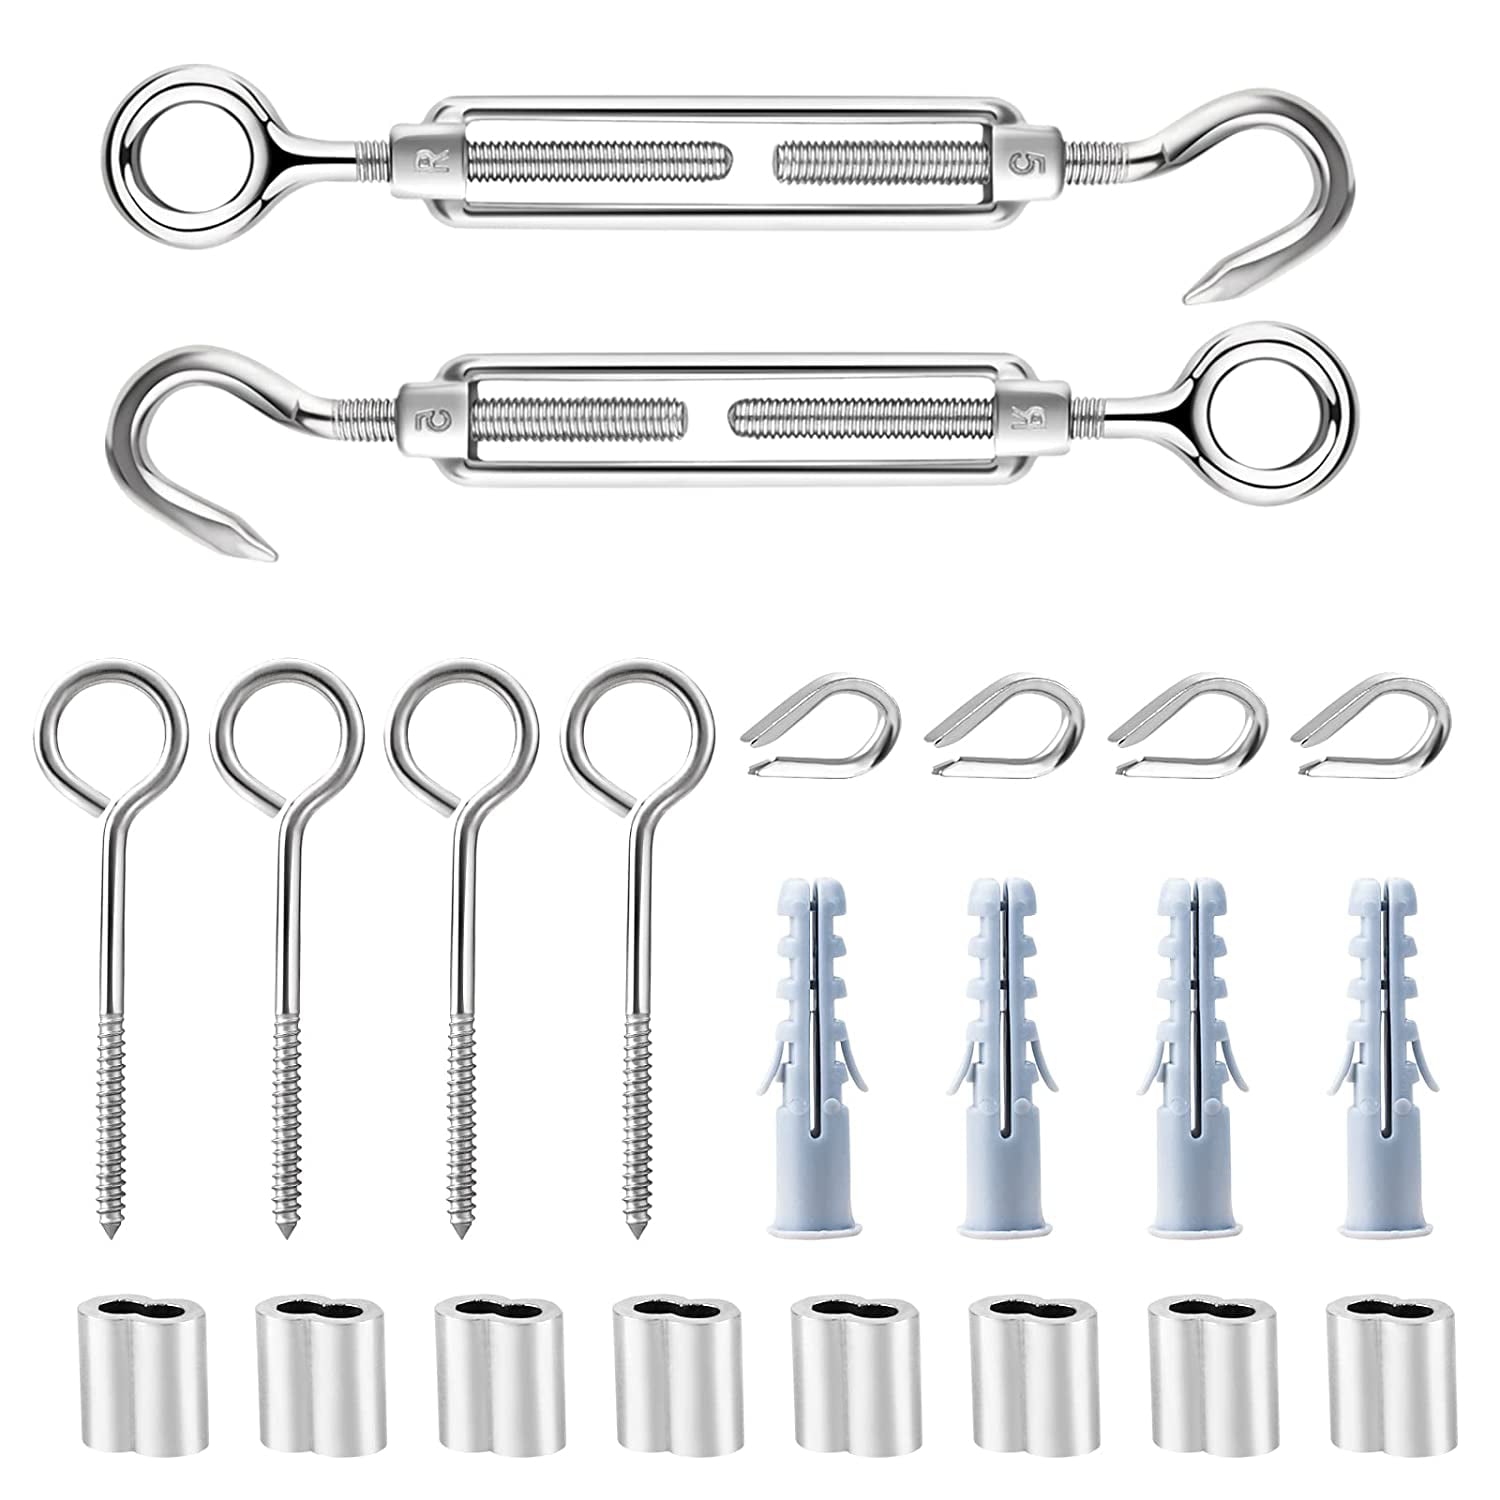 TooTaci Stainless Steel Cable Turnbuckle Kit for 1/16 Cable Rope Tension,Turnbuckle Wire Tensioner Kit of Cable Railing for Wood Post,M5 Turnbuckle Hook and Eye,Wire Rope Thimble,Crimping Sleeves 1/16 